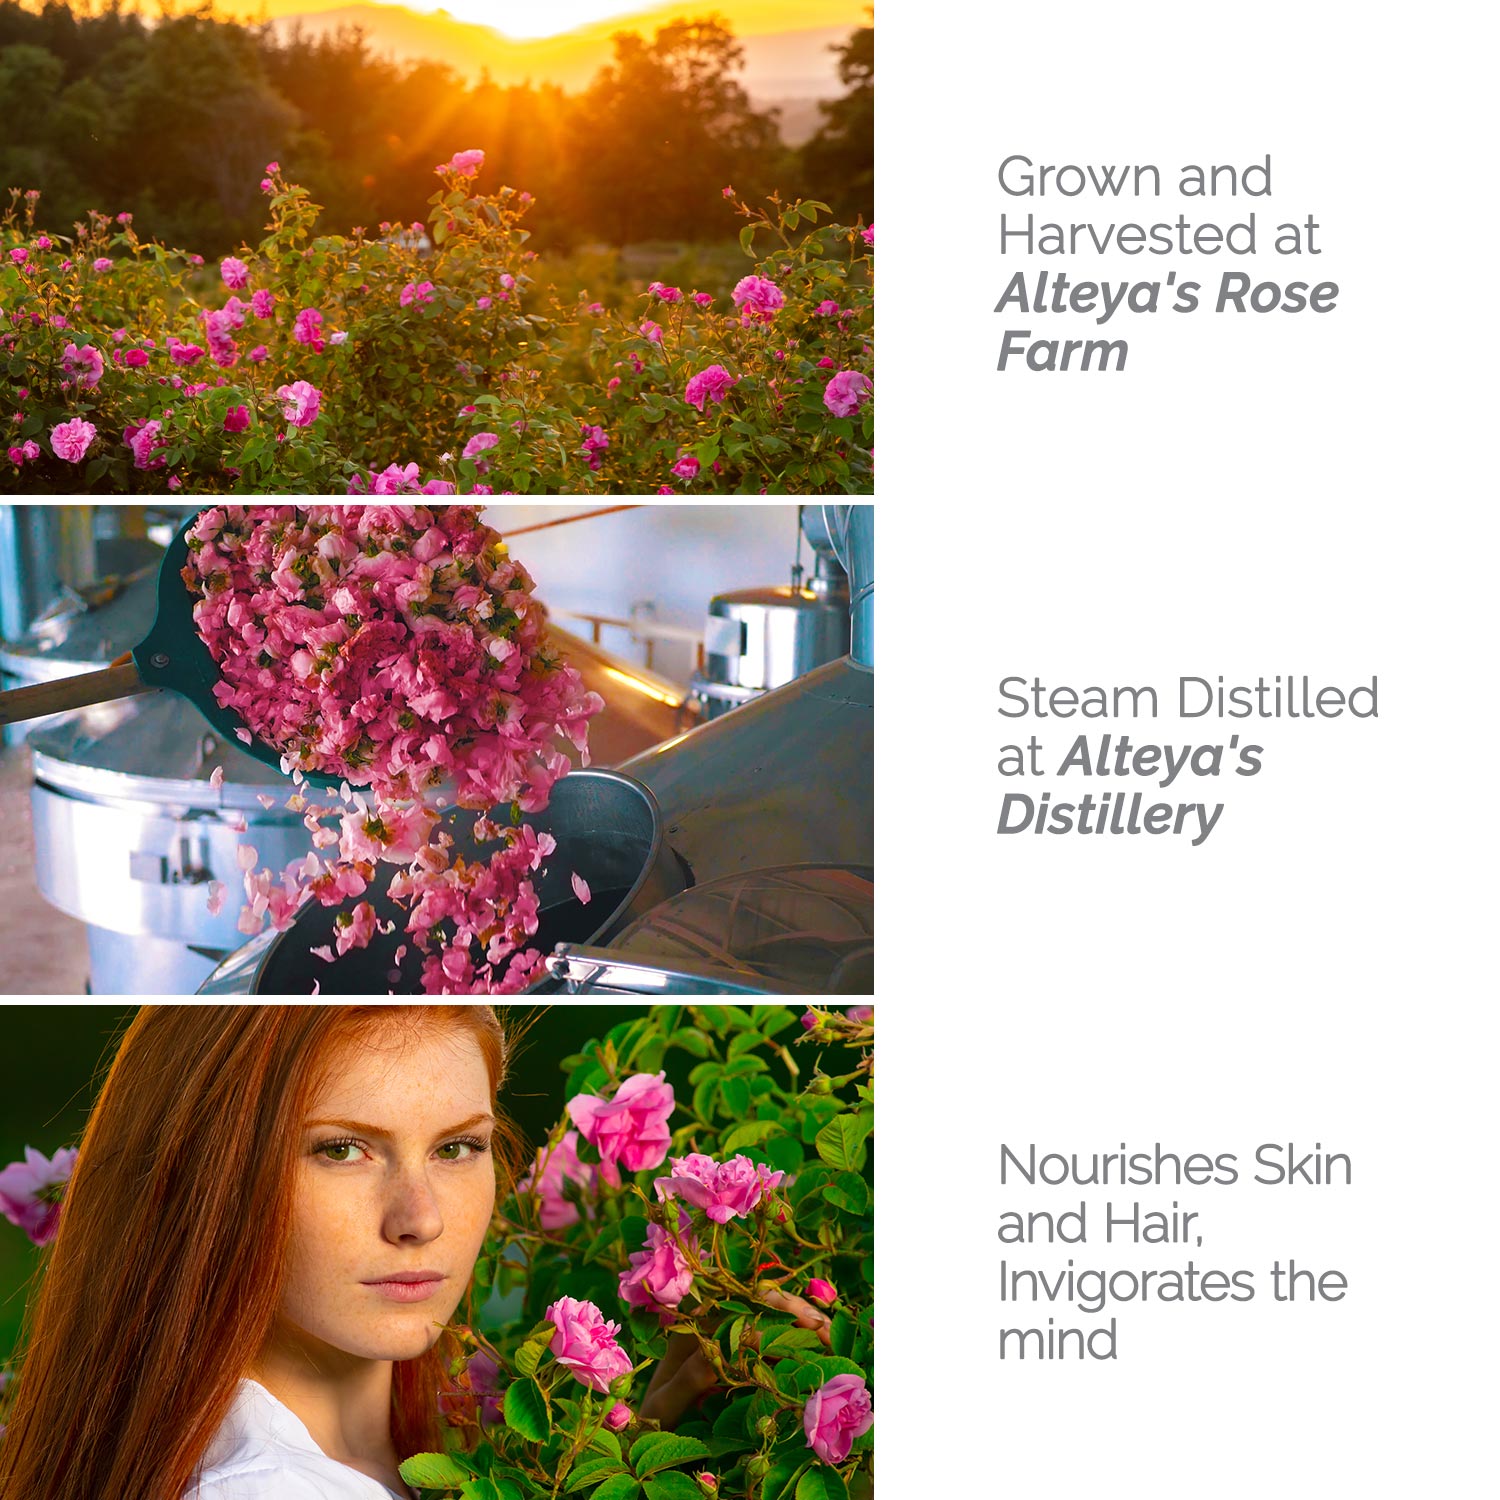 A photo of a woman surrounded by vibrant roses in a field, promoting hydration and healthy skin with the use of Alteya Organics Bulgarian Organic Rose Water - 3.4 Fl Oz Spray.